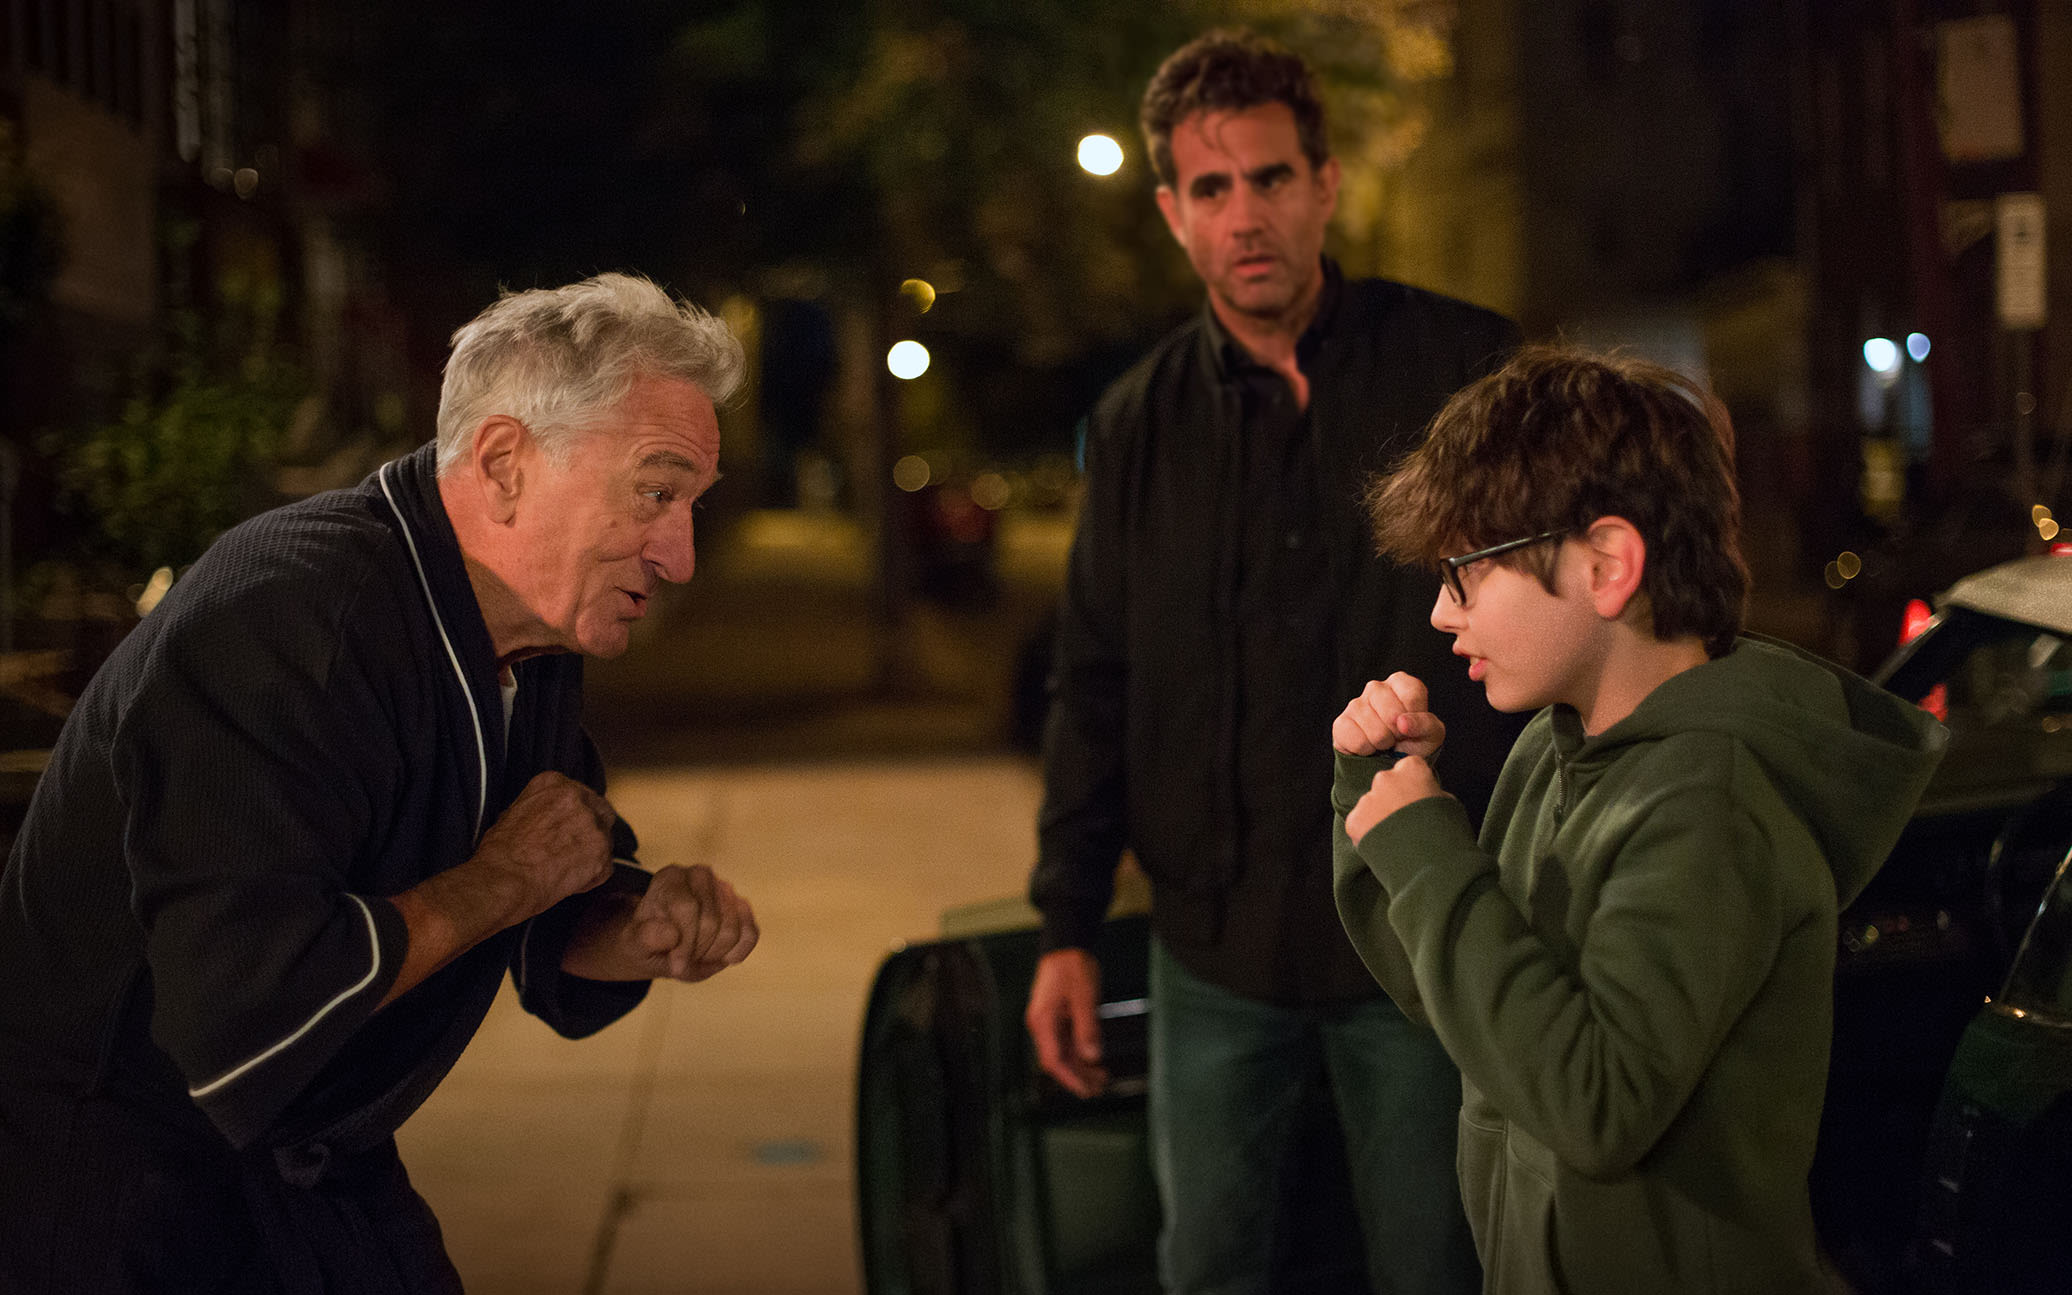 'Ezra' Movie Sees Actor With Autism Shine With Bobby Cannavale, Robert De Niro